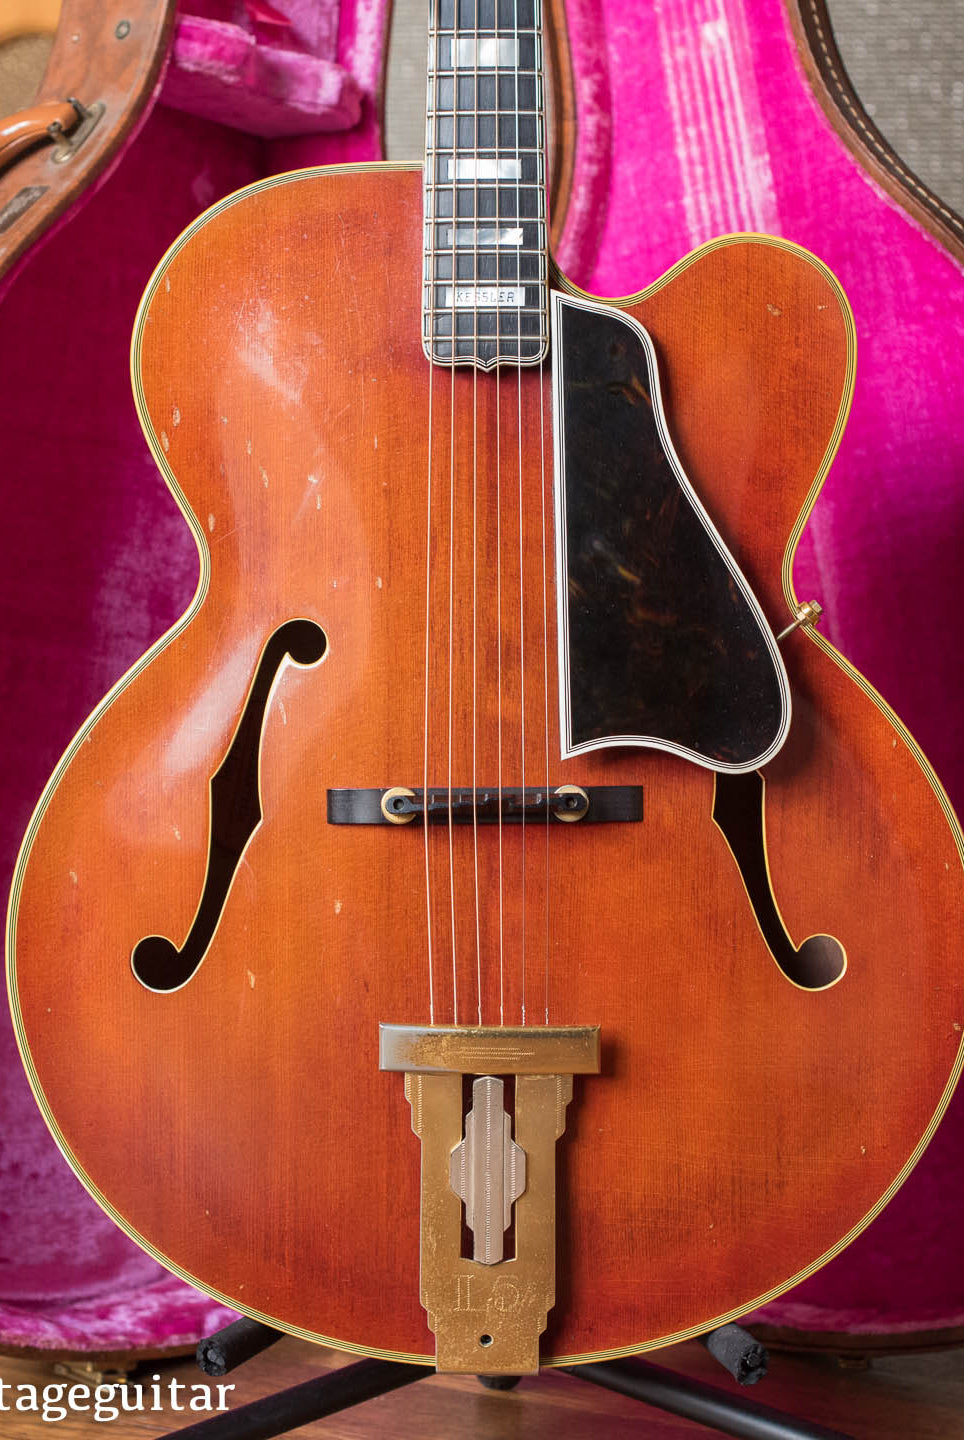 Gibson L-5 CT guitar 1961